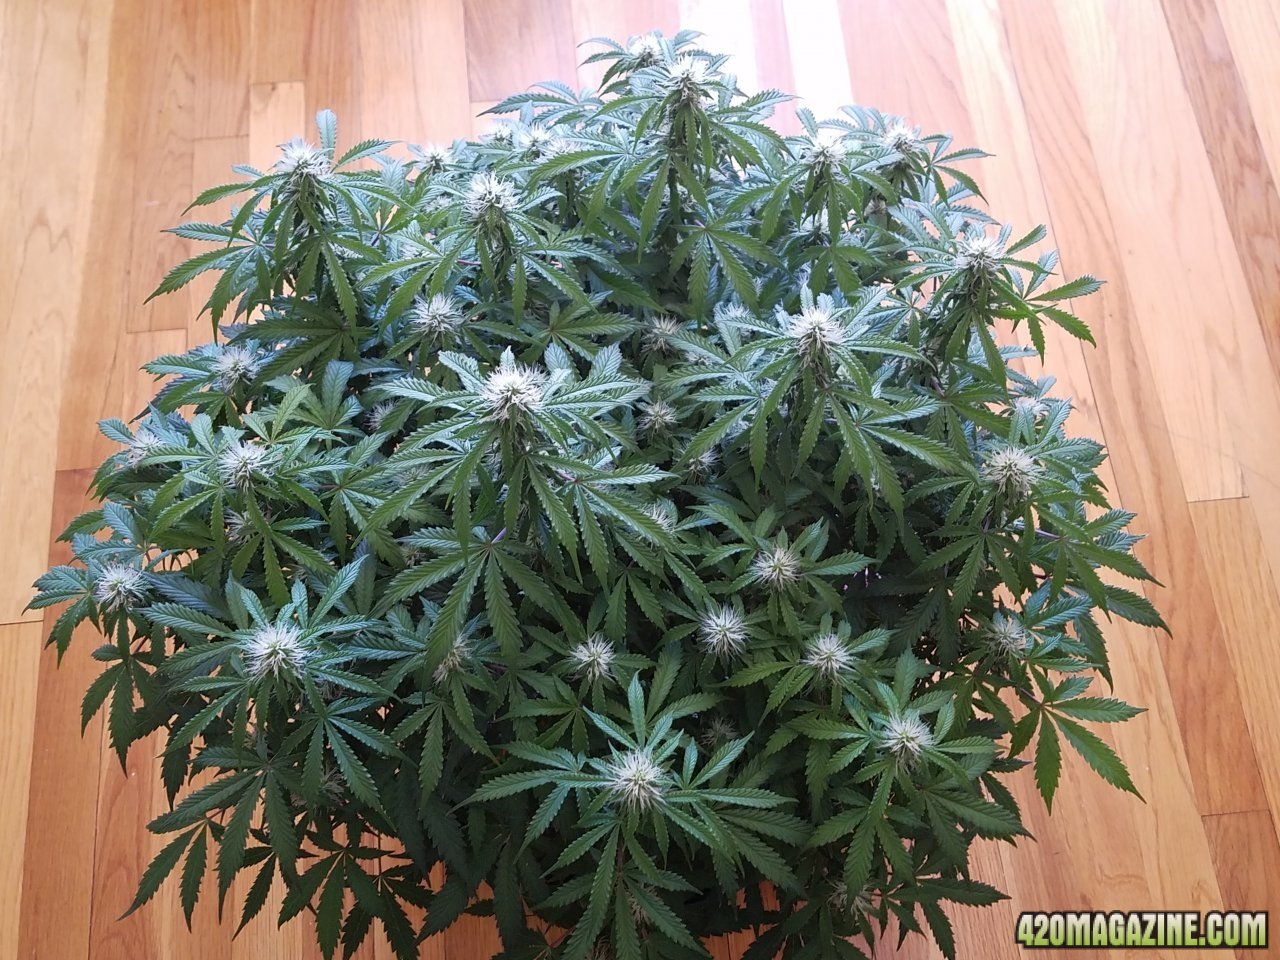 042318 Jack Herer Auto Day 67 Day 18 with Hairs 1.jpg